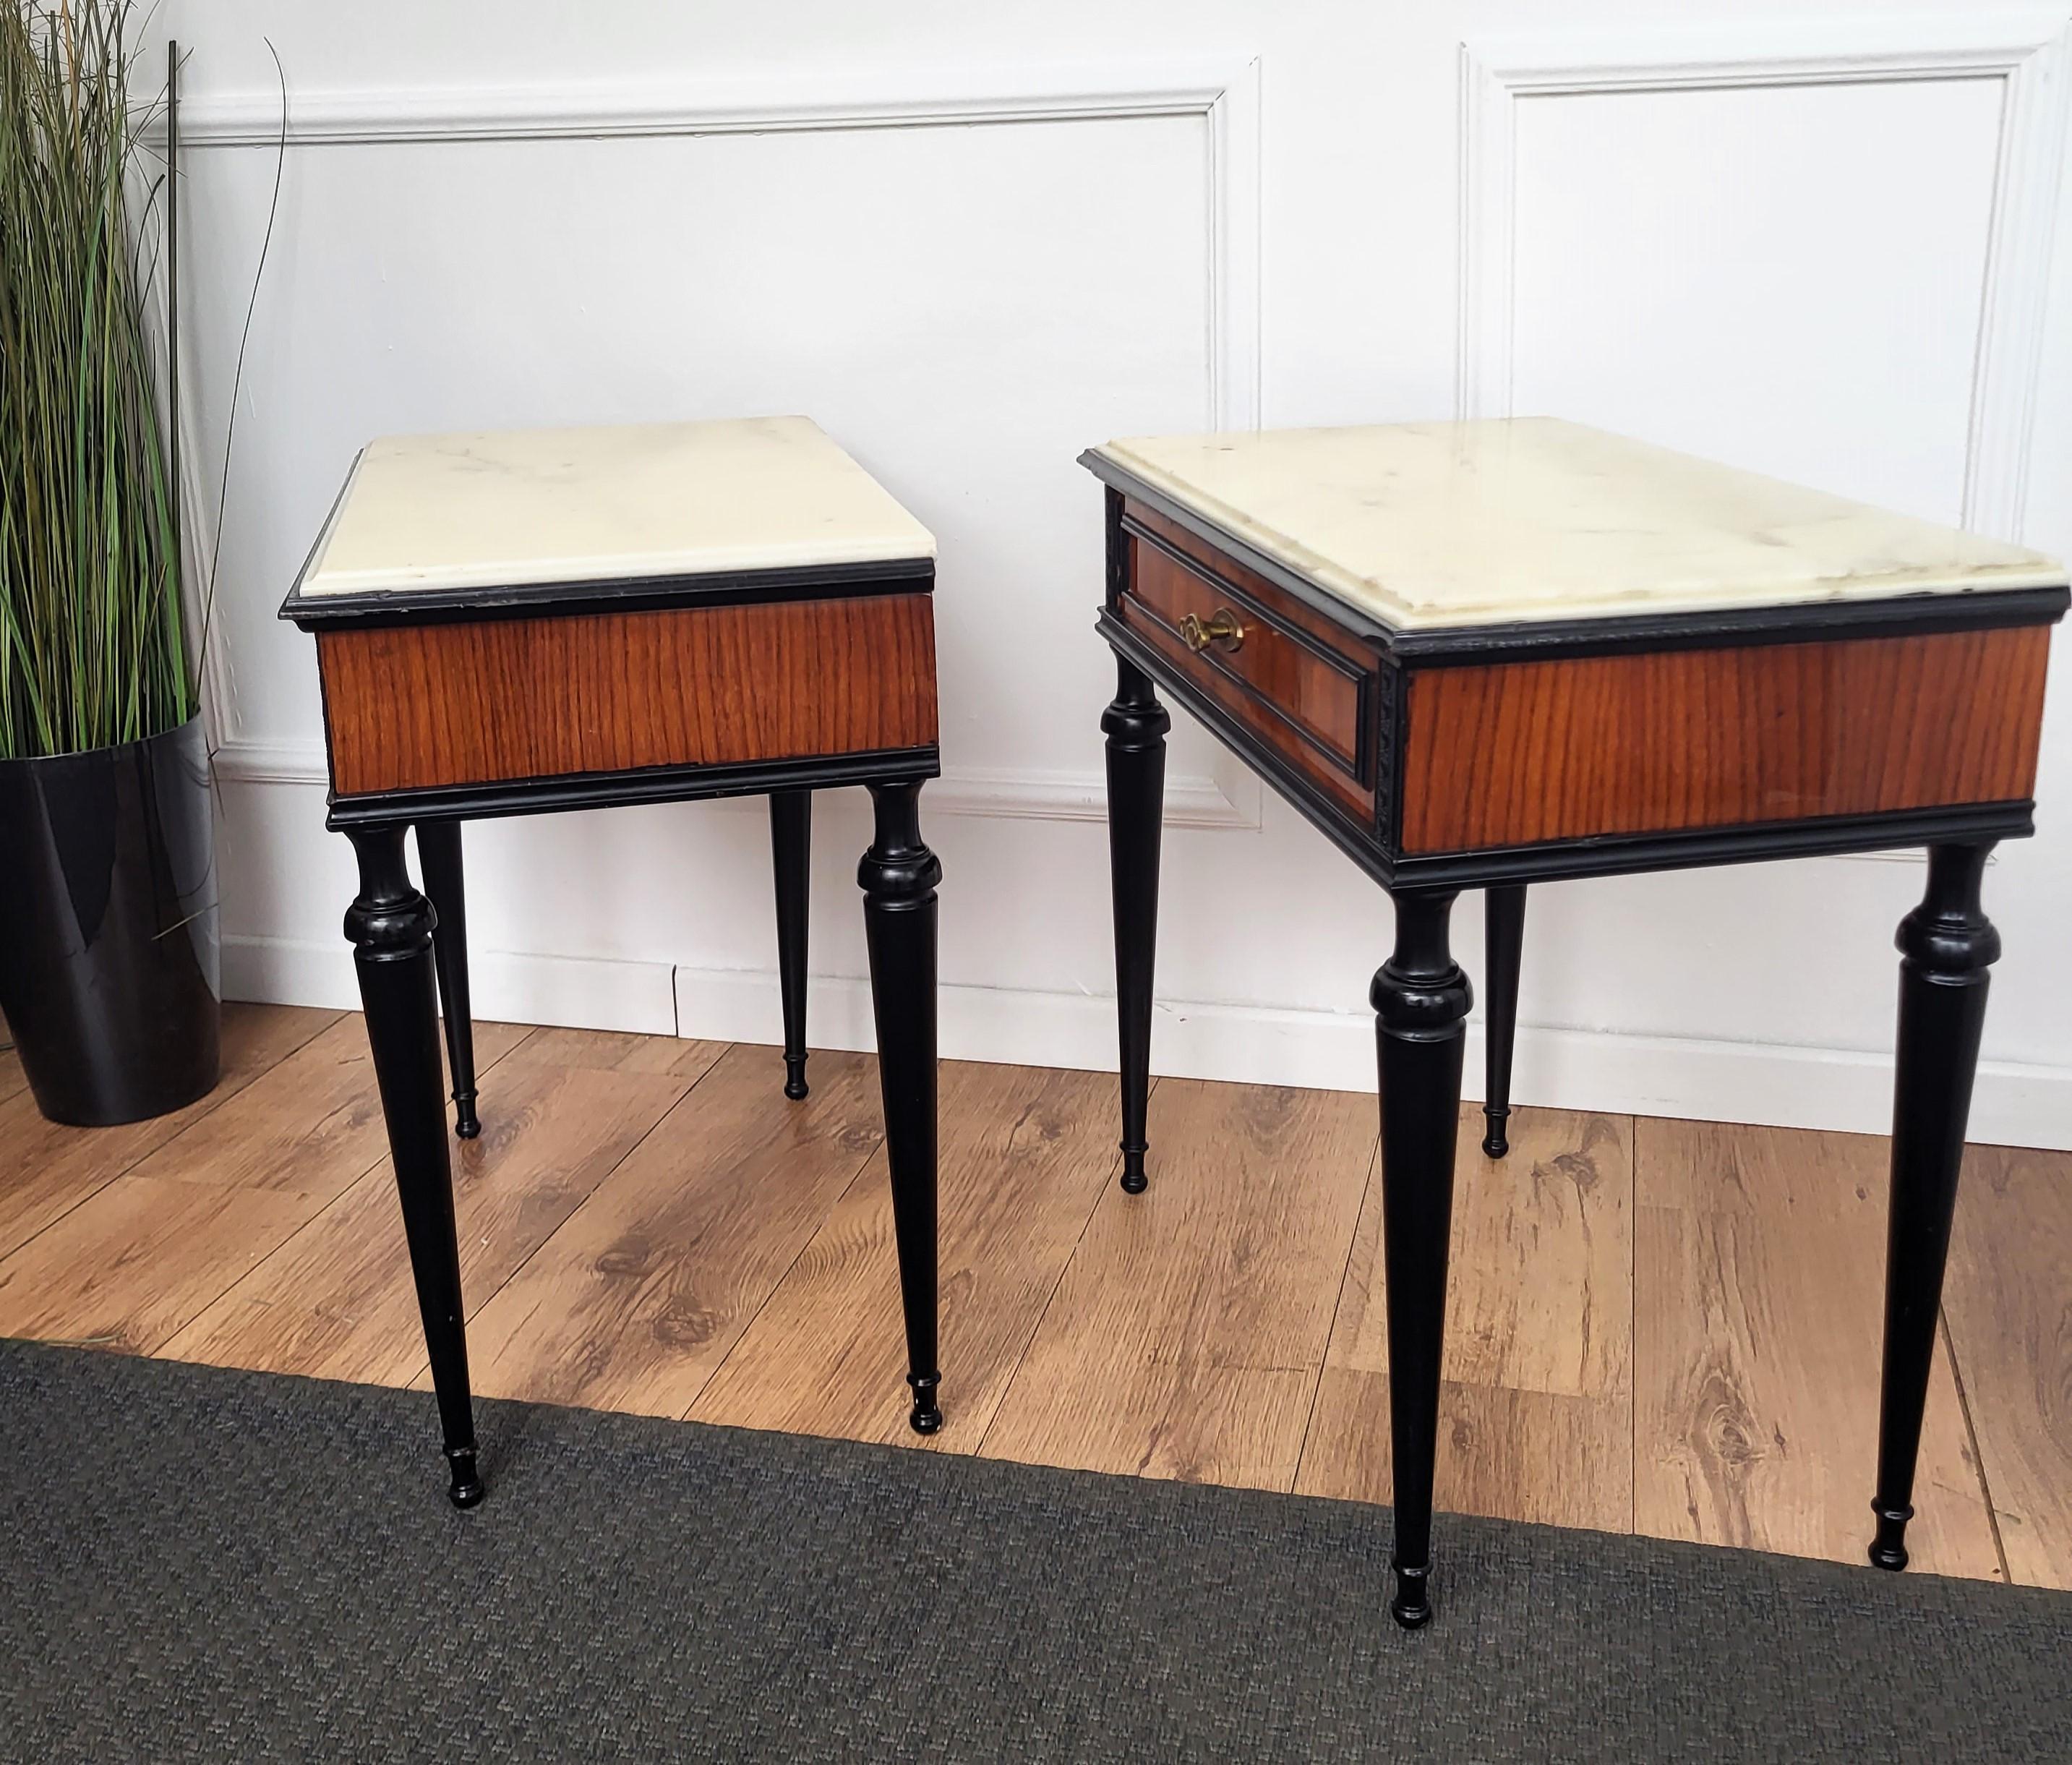 Brass Pair of Italian Mid-Century Art Deco Wood Marble Top Night Stands Bedside Tables